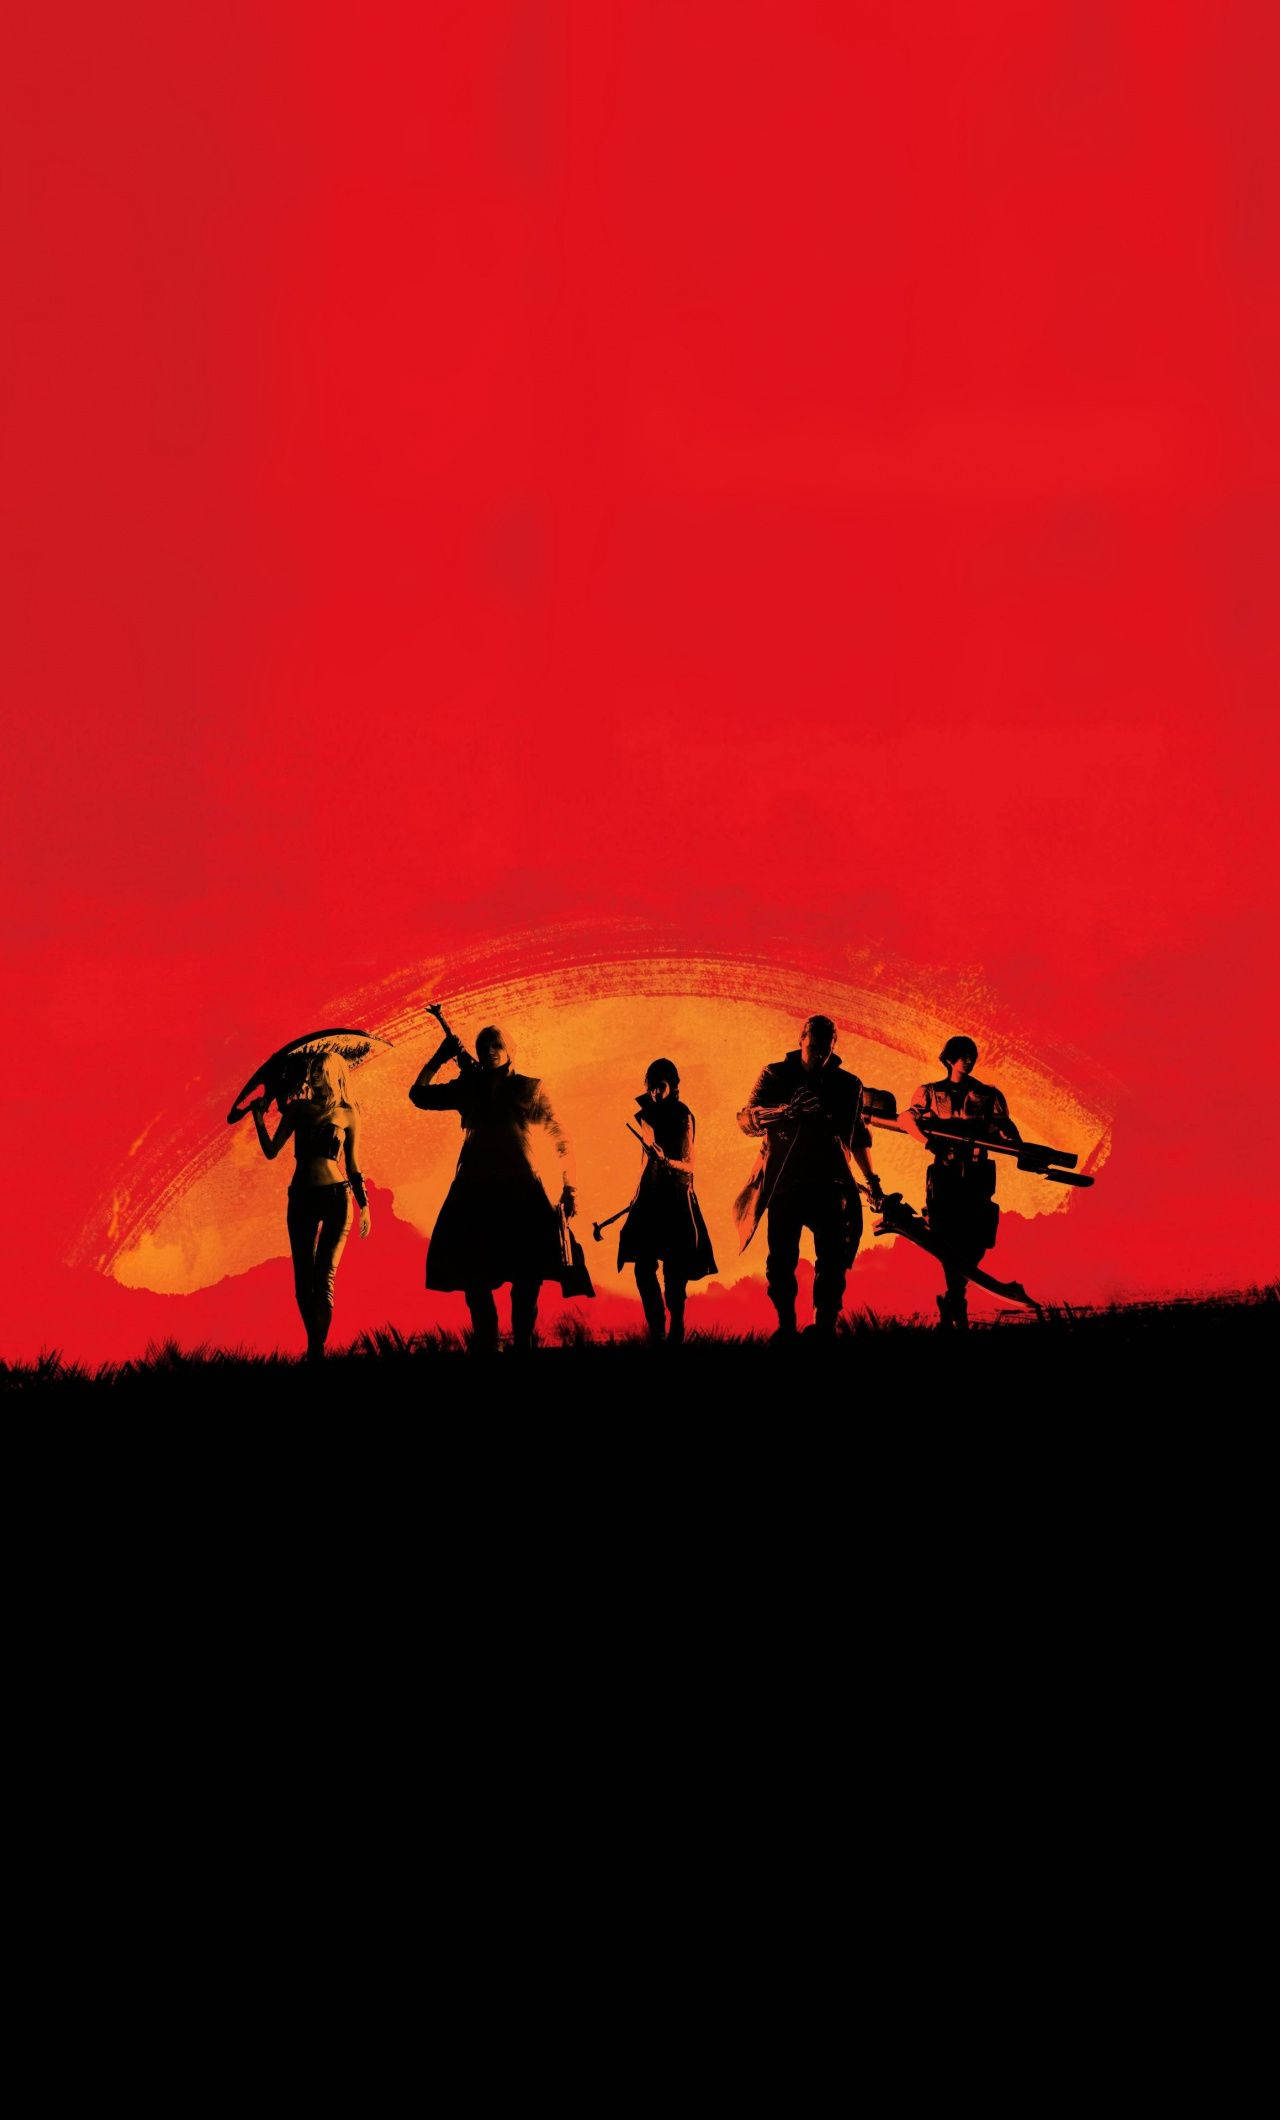 A Riveting Lineup of Red Dead Characters on iPhone backdrop Wallpaper